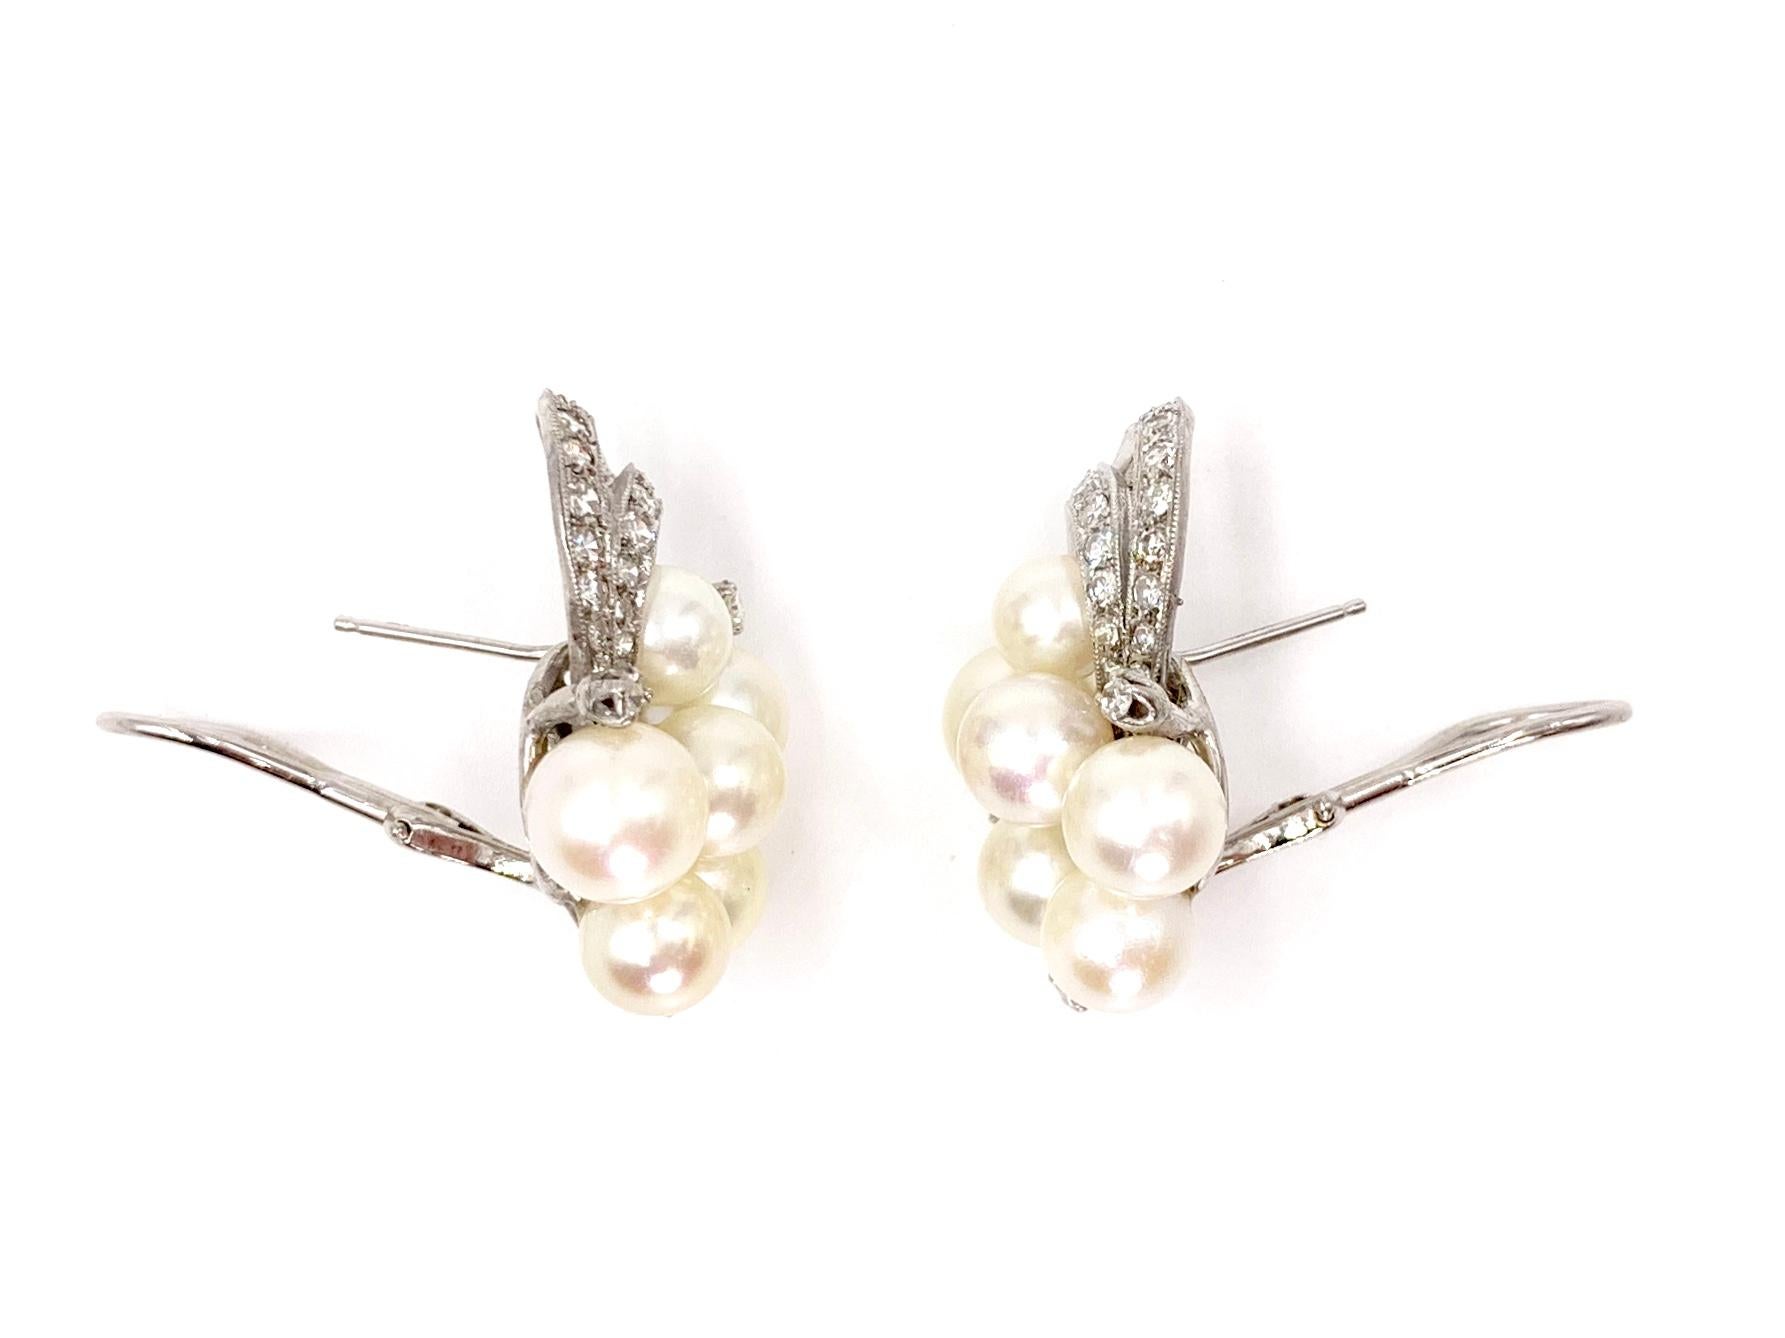 Round Cut White Gold Diamond and Pearl Edwardian Inspired Earrings